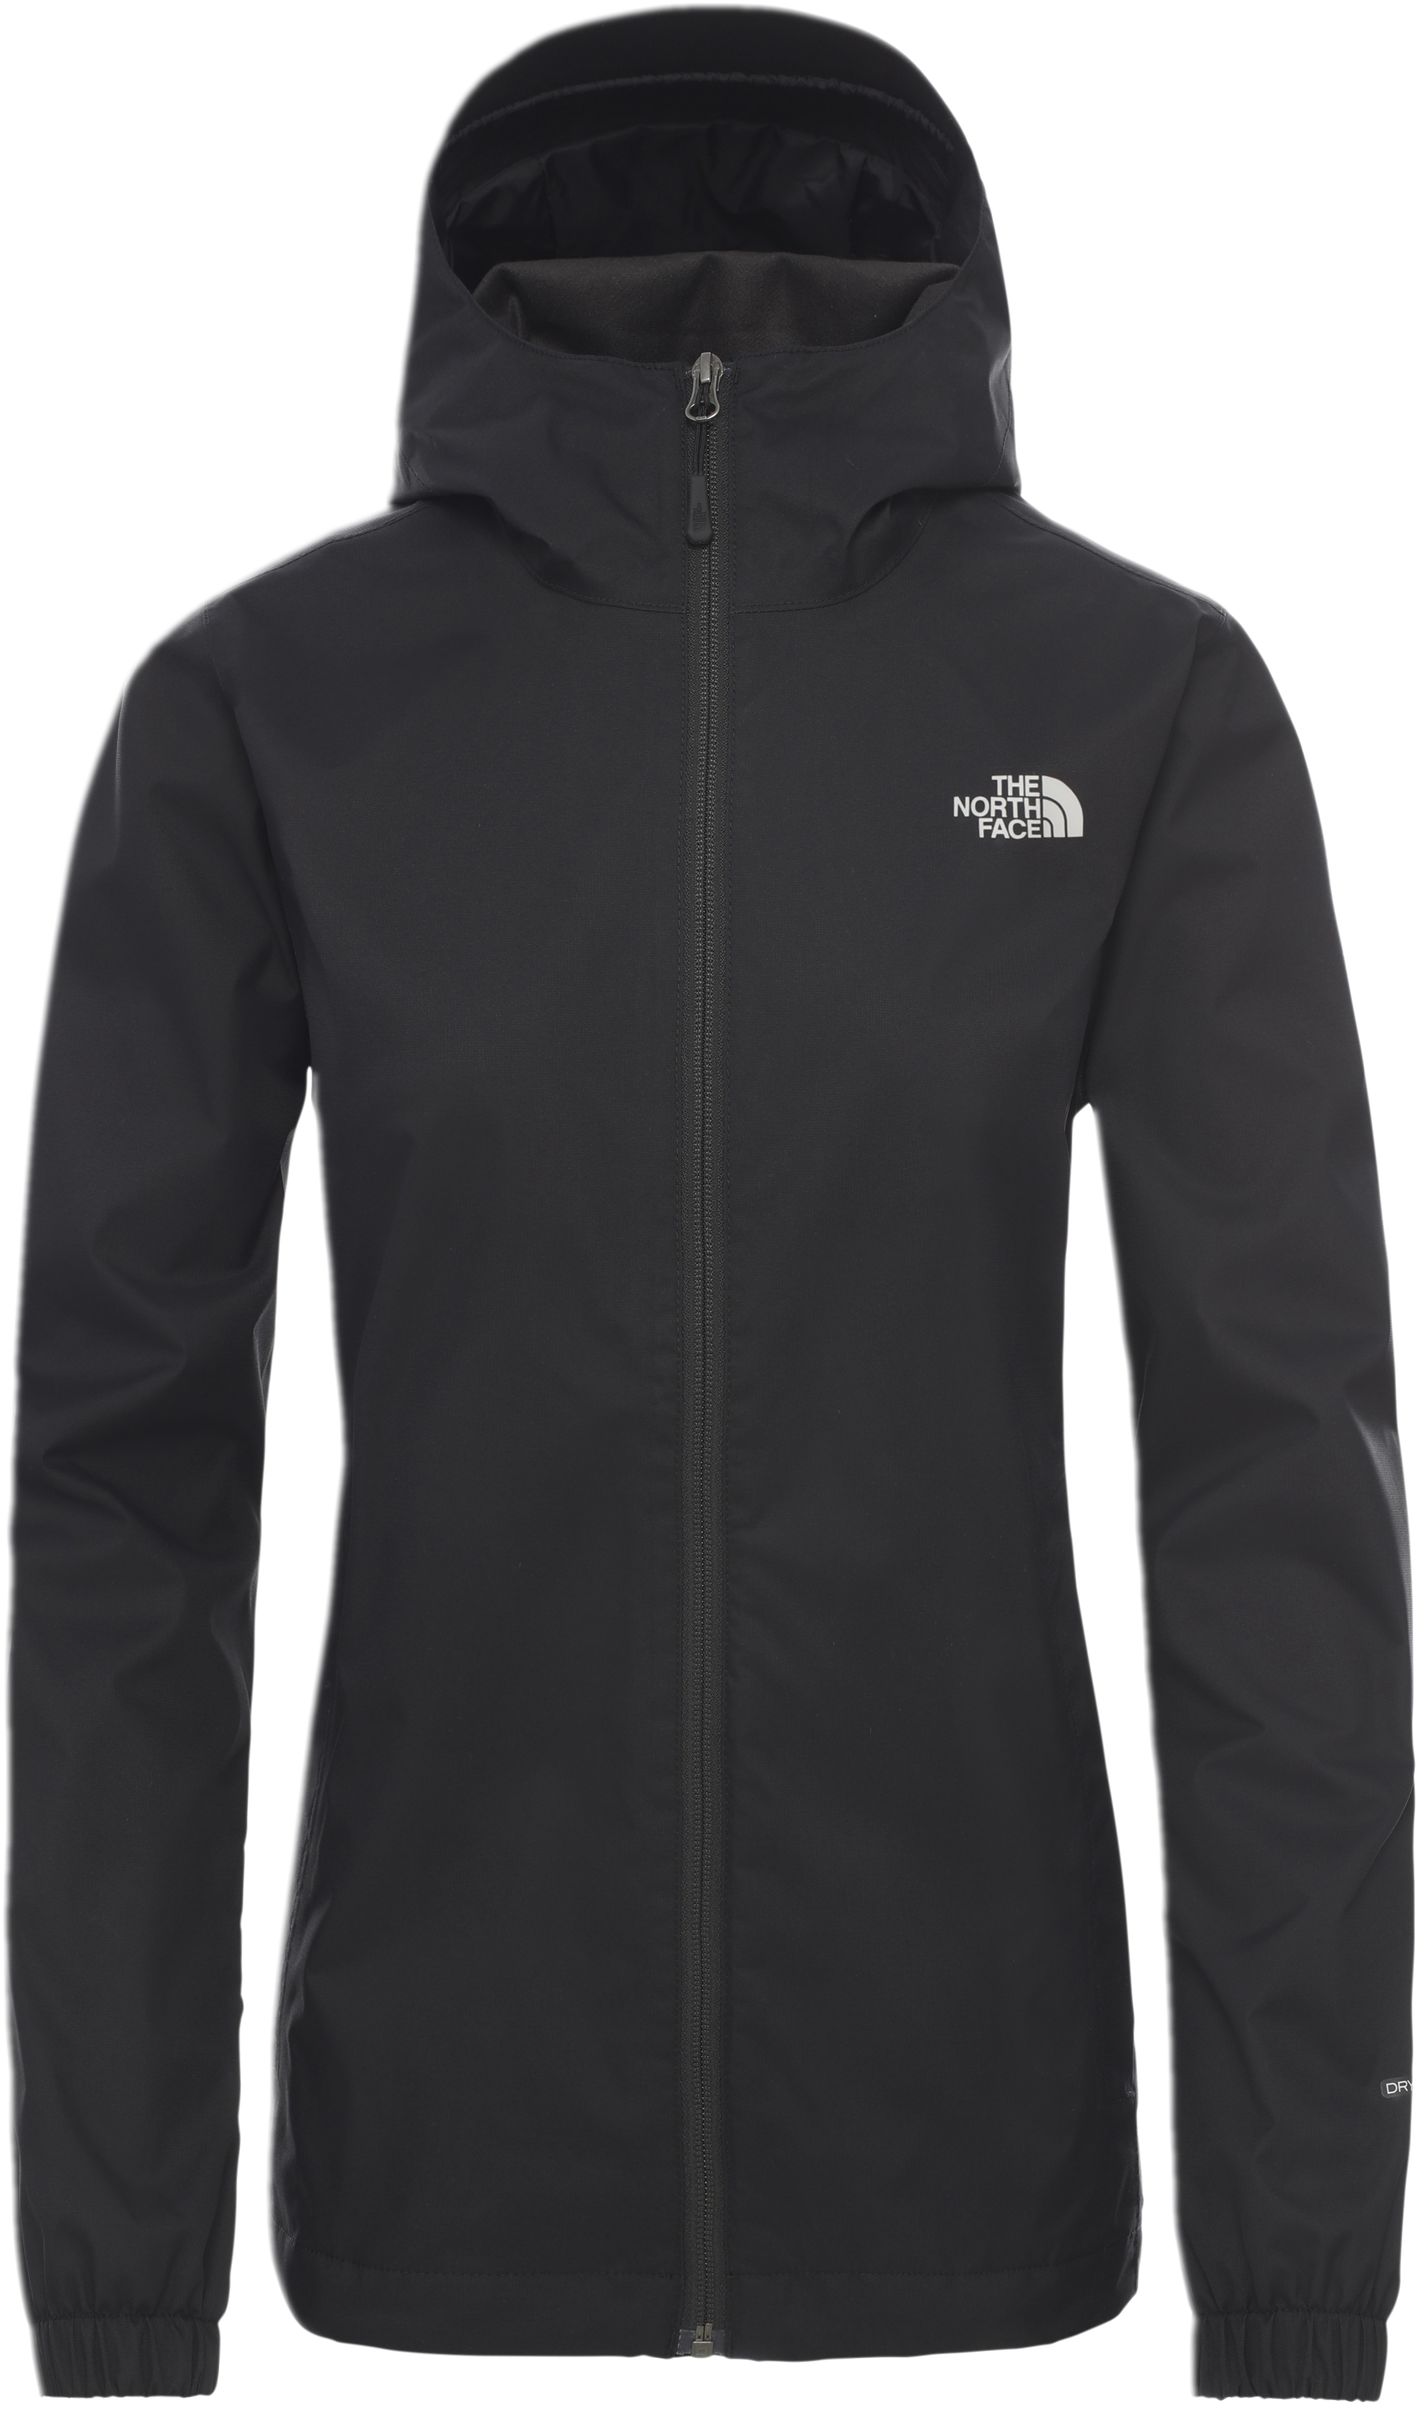 THE NORTH FACE, W QUEST JKT